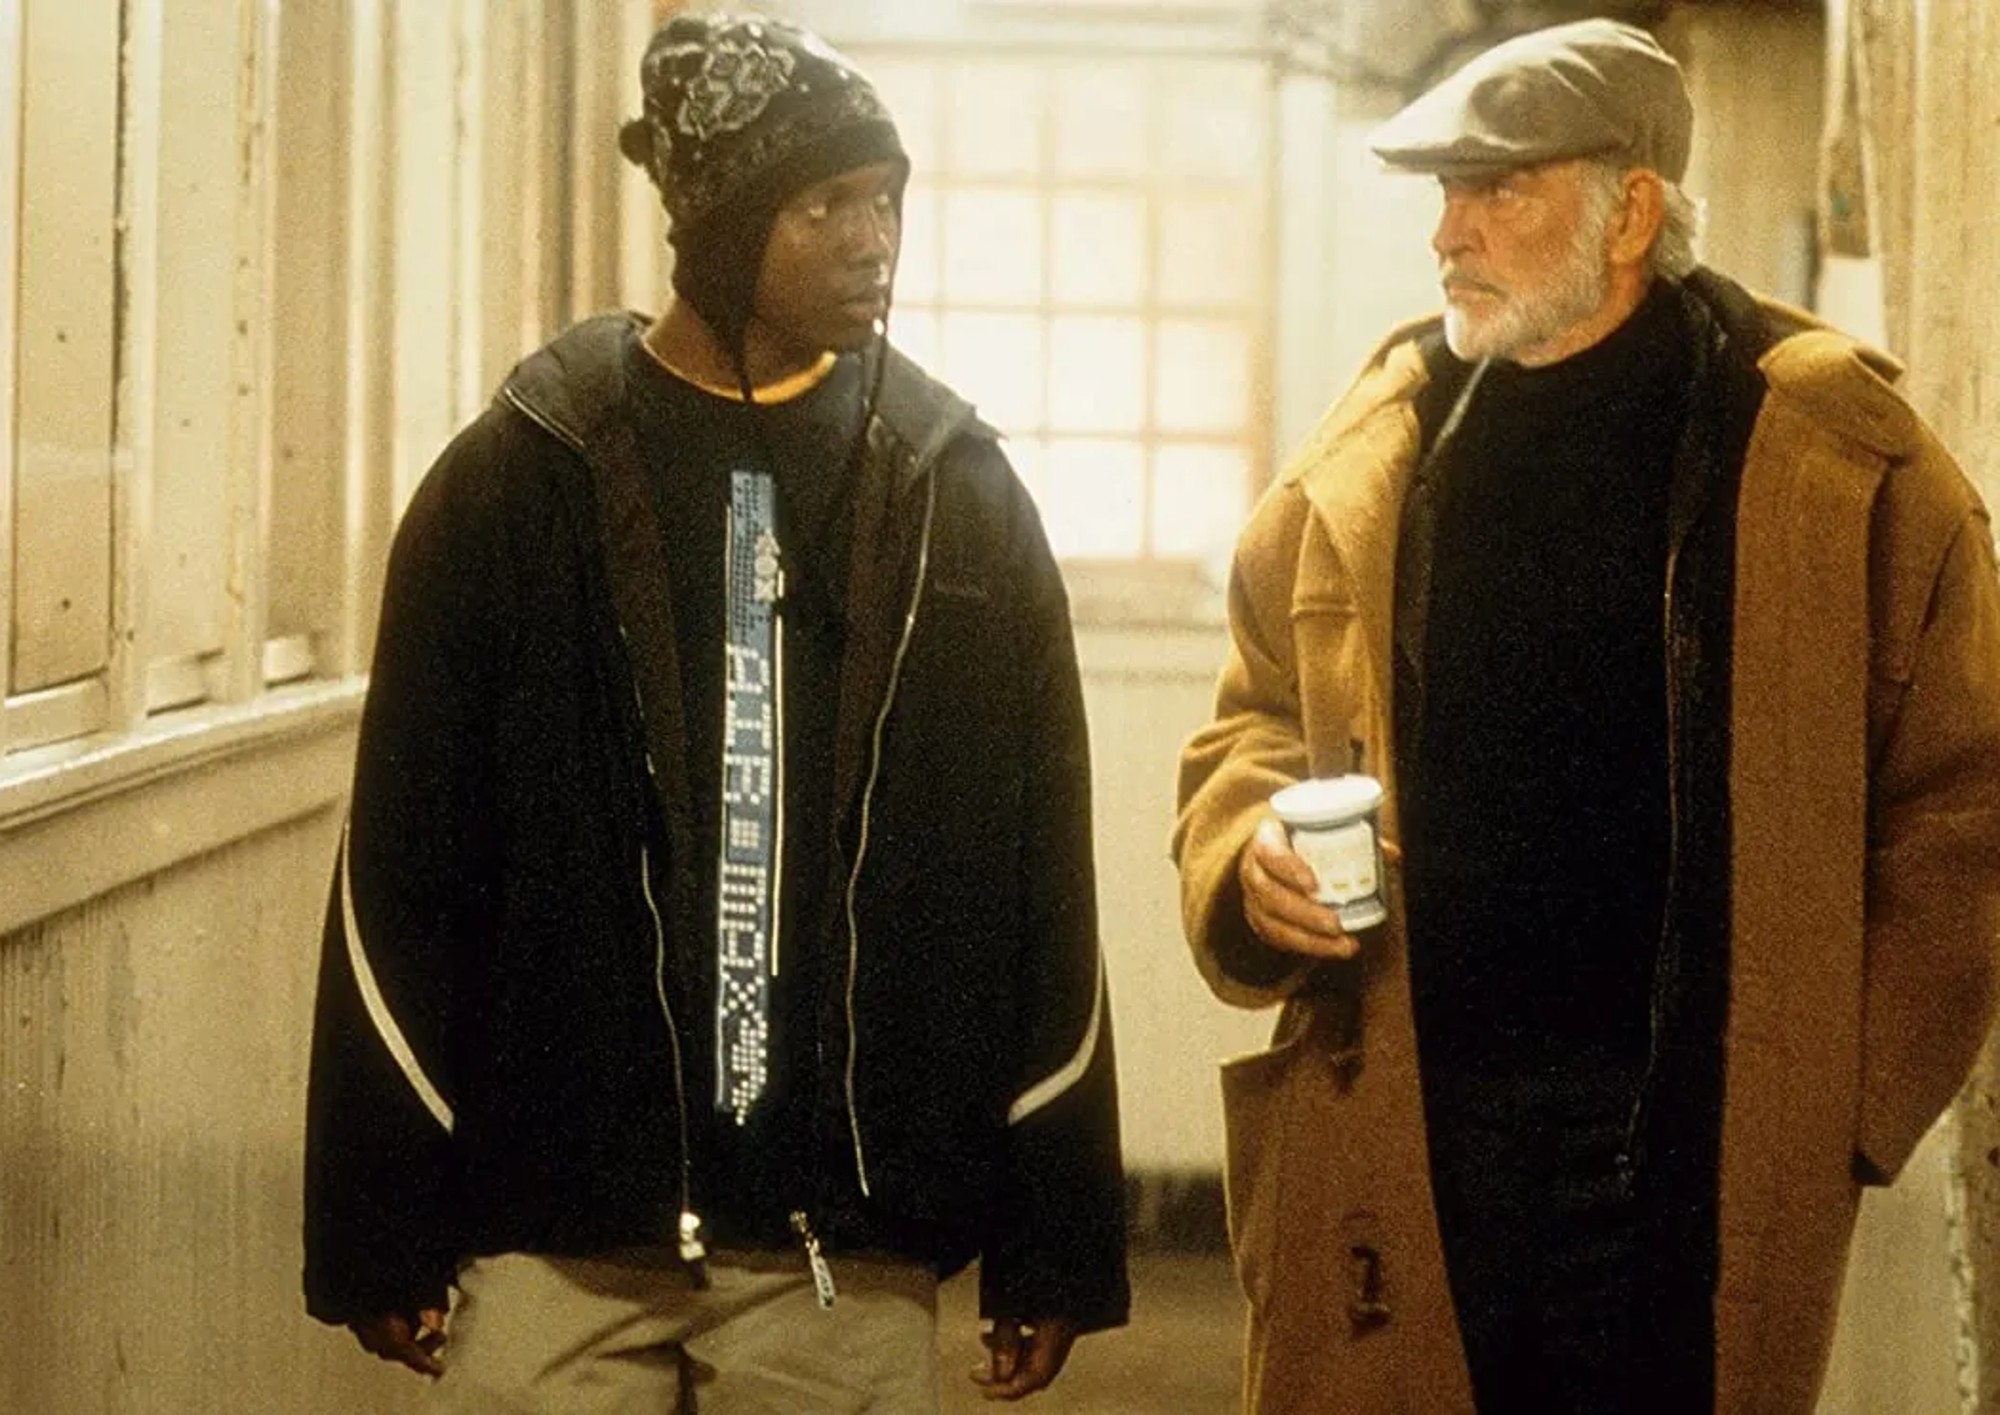 Image from the motion picture Finding Forrester